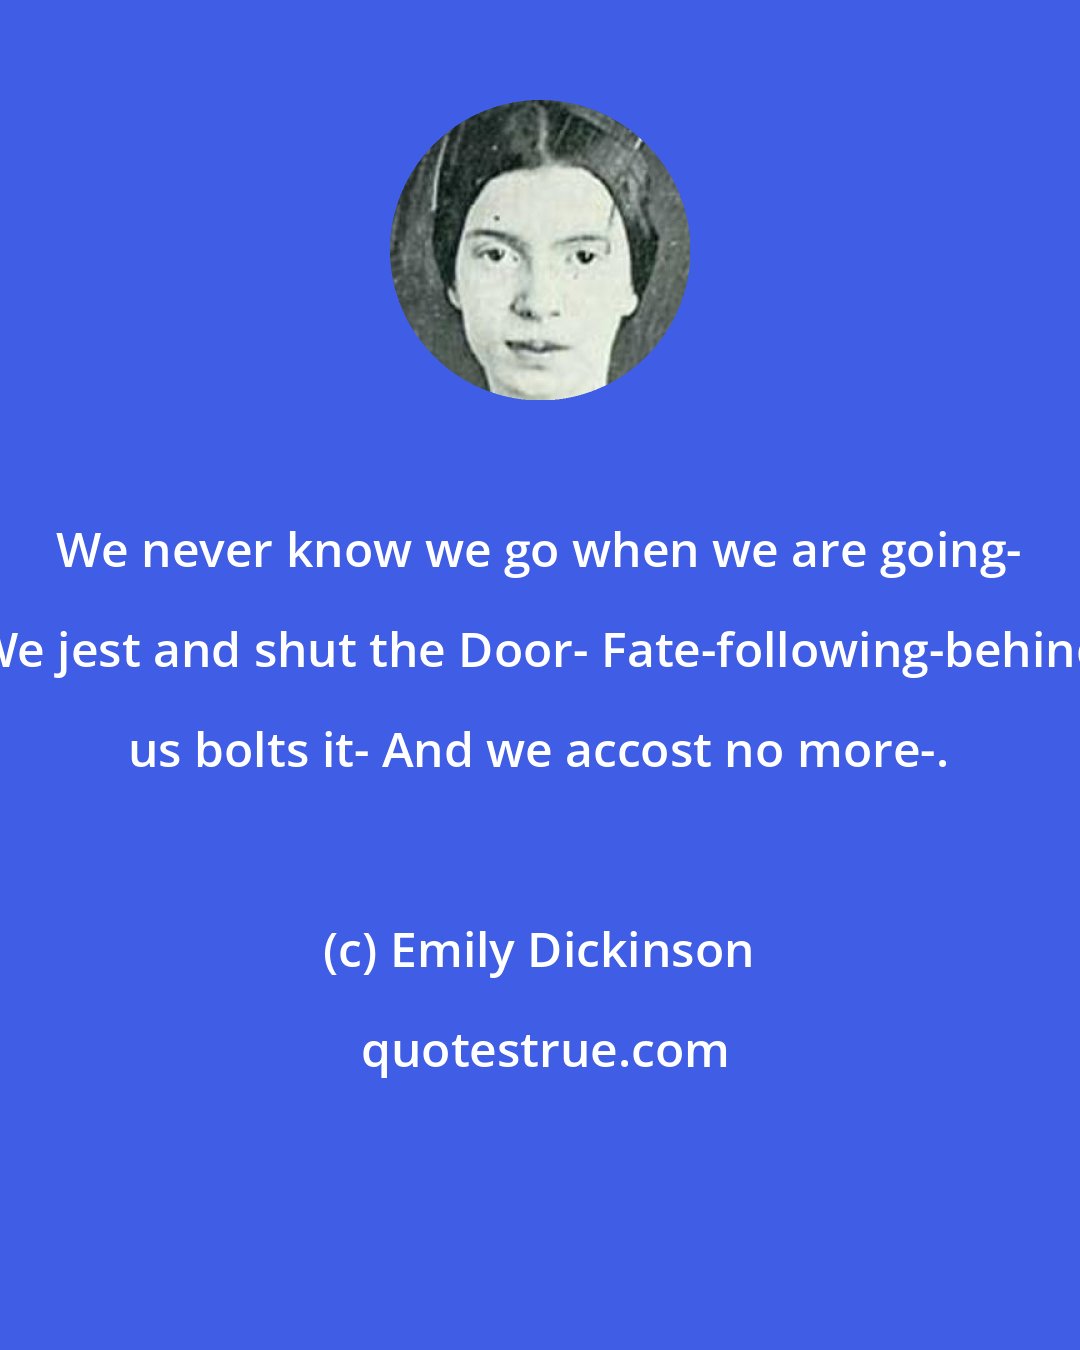 Emily Dickinson: We never know we go when we are going- We jest and shut the Door- Fate-following-behind us bolts it- And we accost no more-.